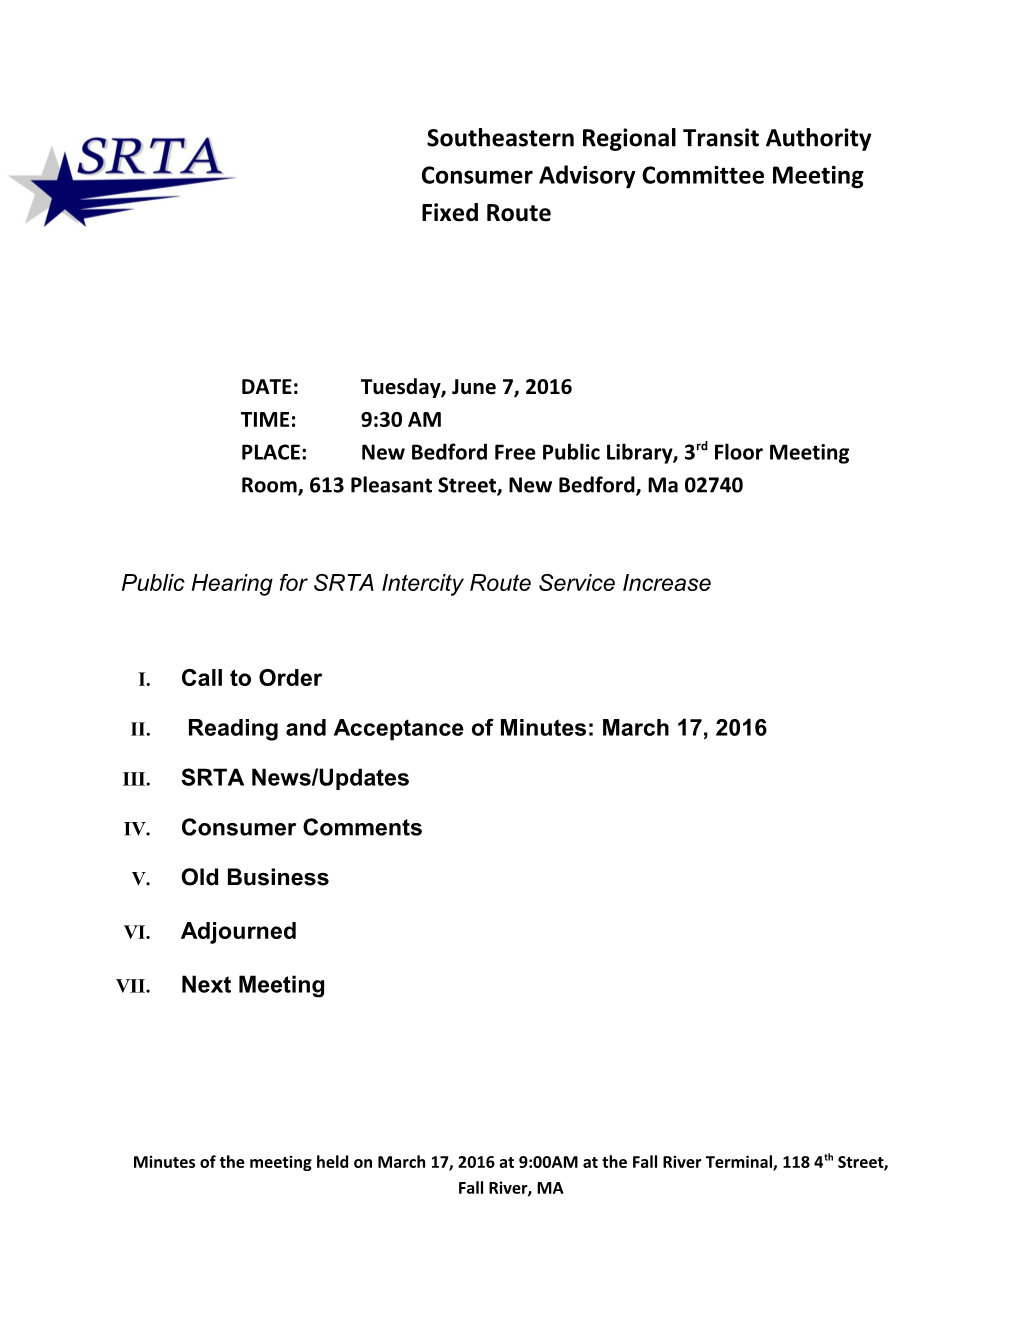 Public Hearing for SRTA Intercity Route Service Increase